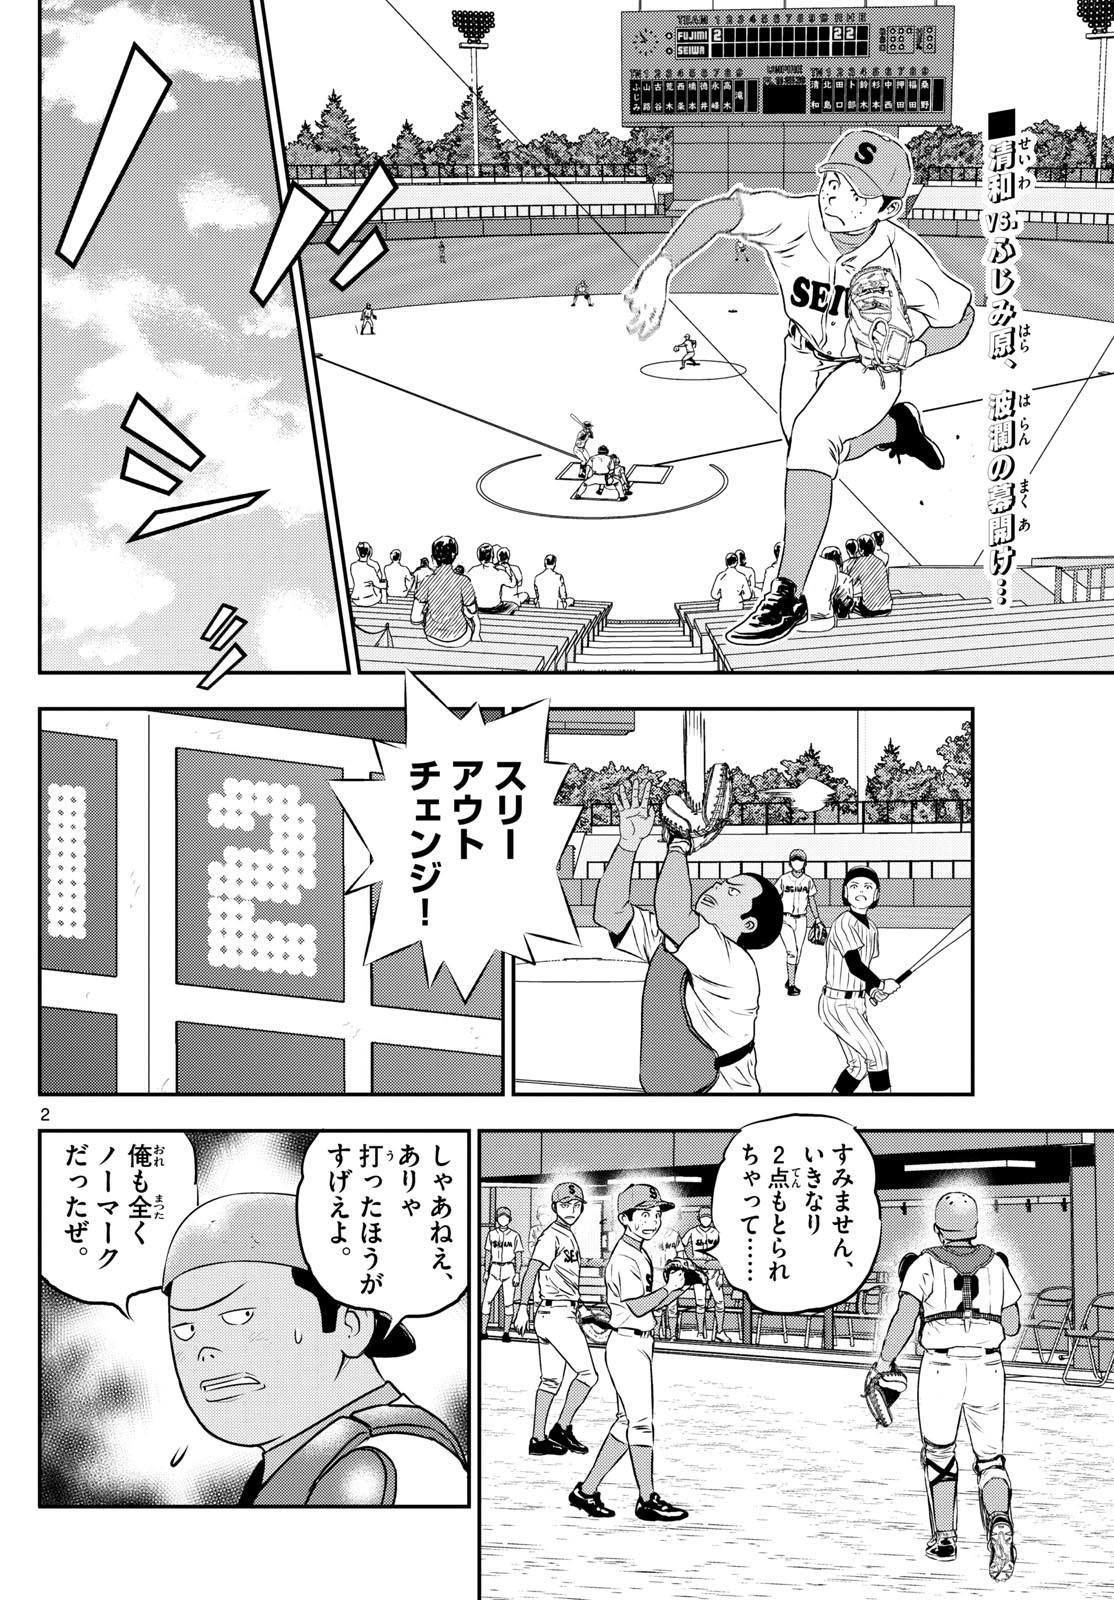 Major 2nd - メジャーセカンド - Chapter 262 - Page 2